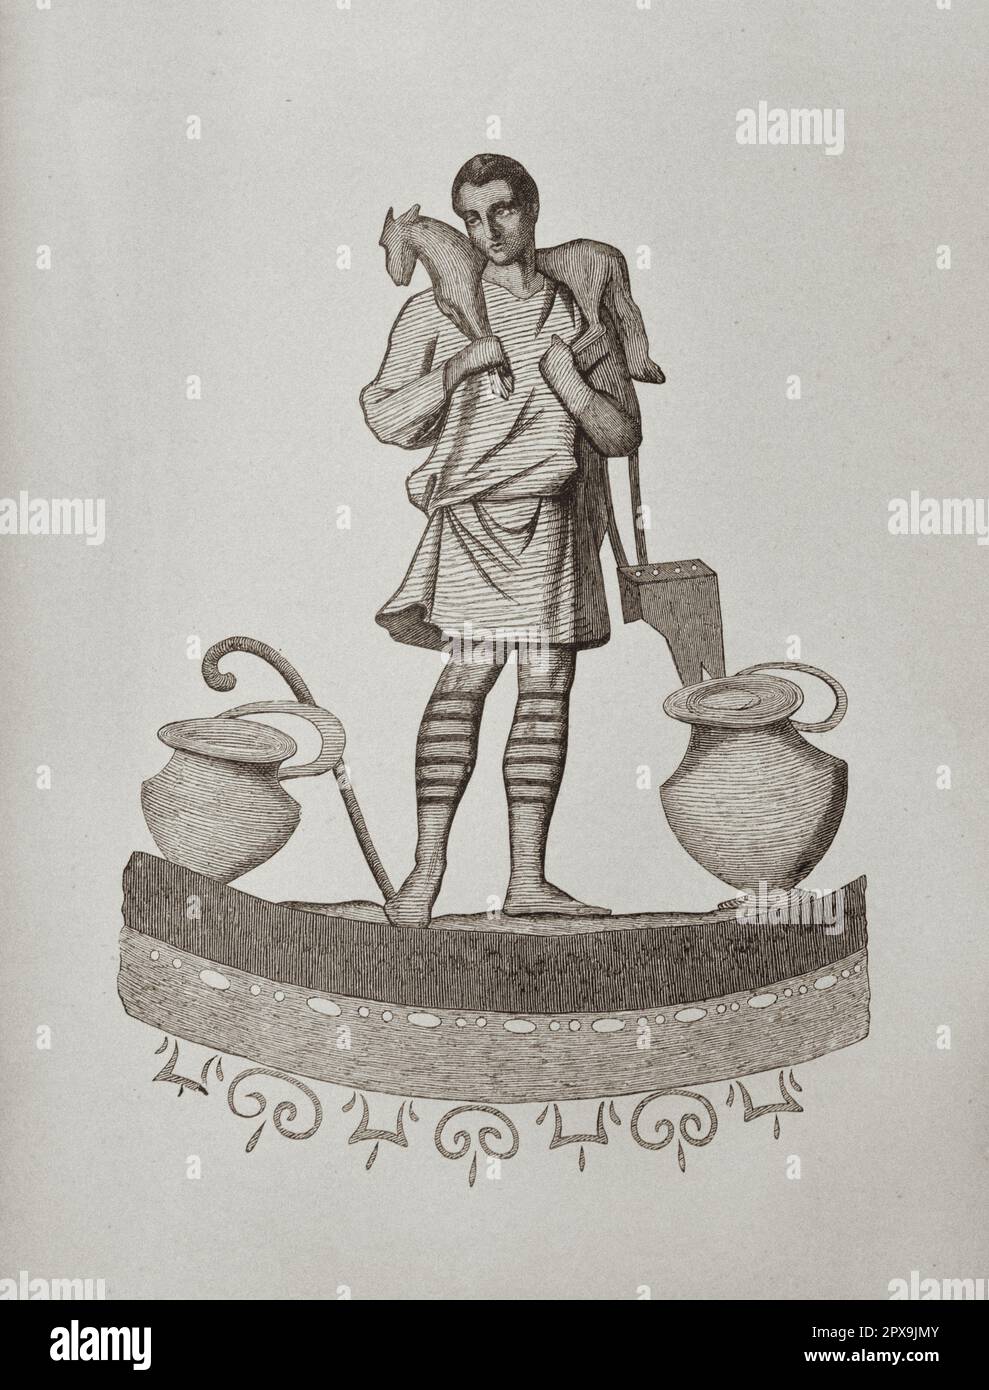 Vintage illustration of Good Shepherd from Catacombs of Saint Agnes. Rome. Italy The Catacomb of Saint Agnes is one of the catacombs of Rome, placed at the second mile of via Nomentana, inside the monumental complex of Sant'Agnese fuori le mura, in the Quartiere Trieste. Stock Photo